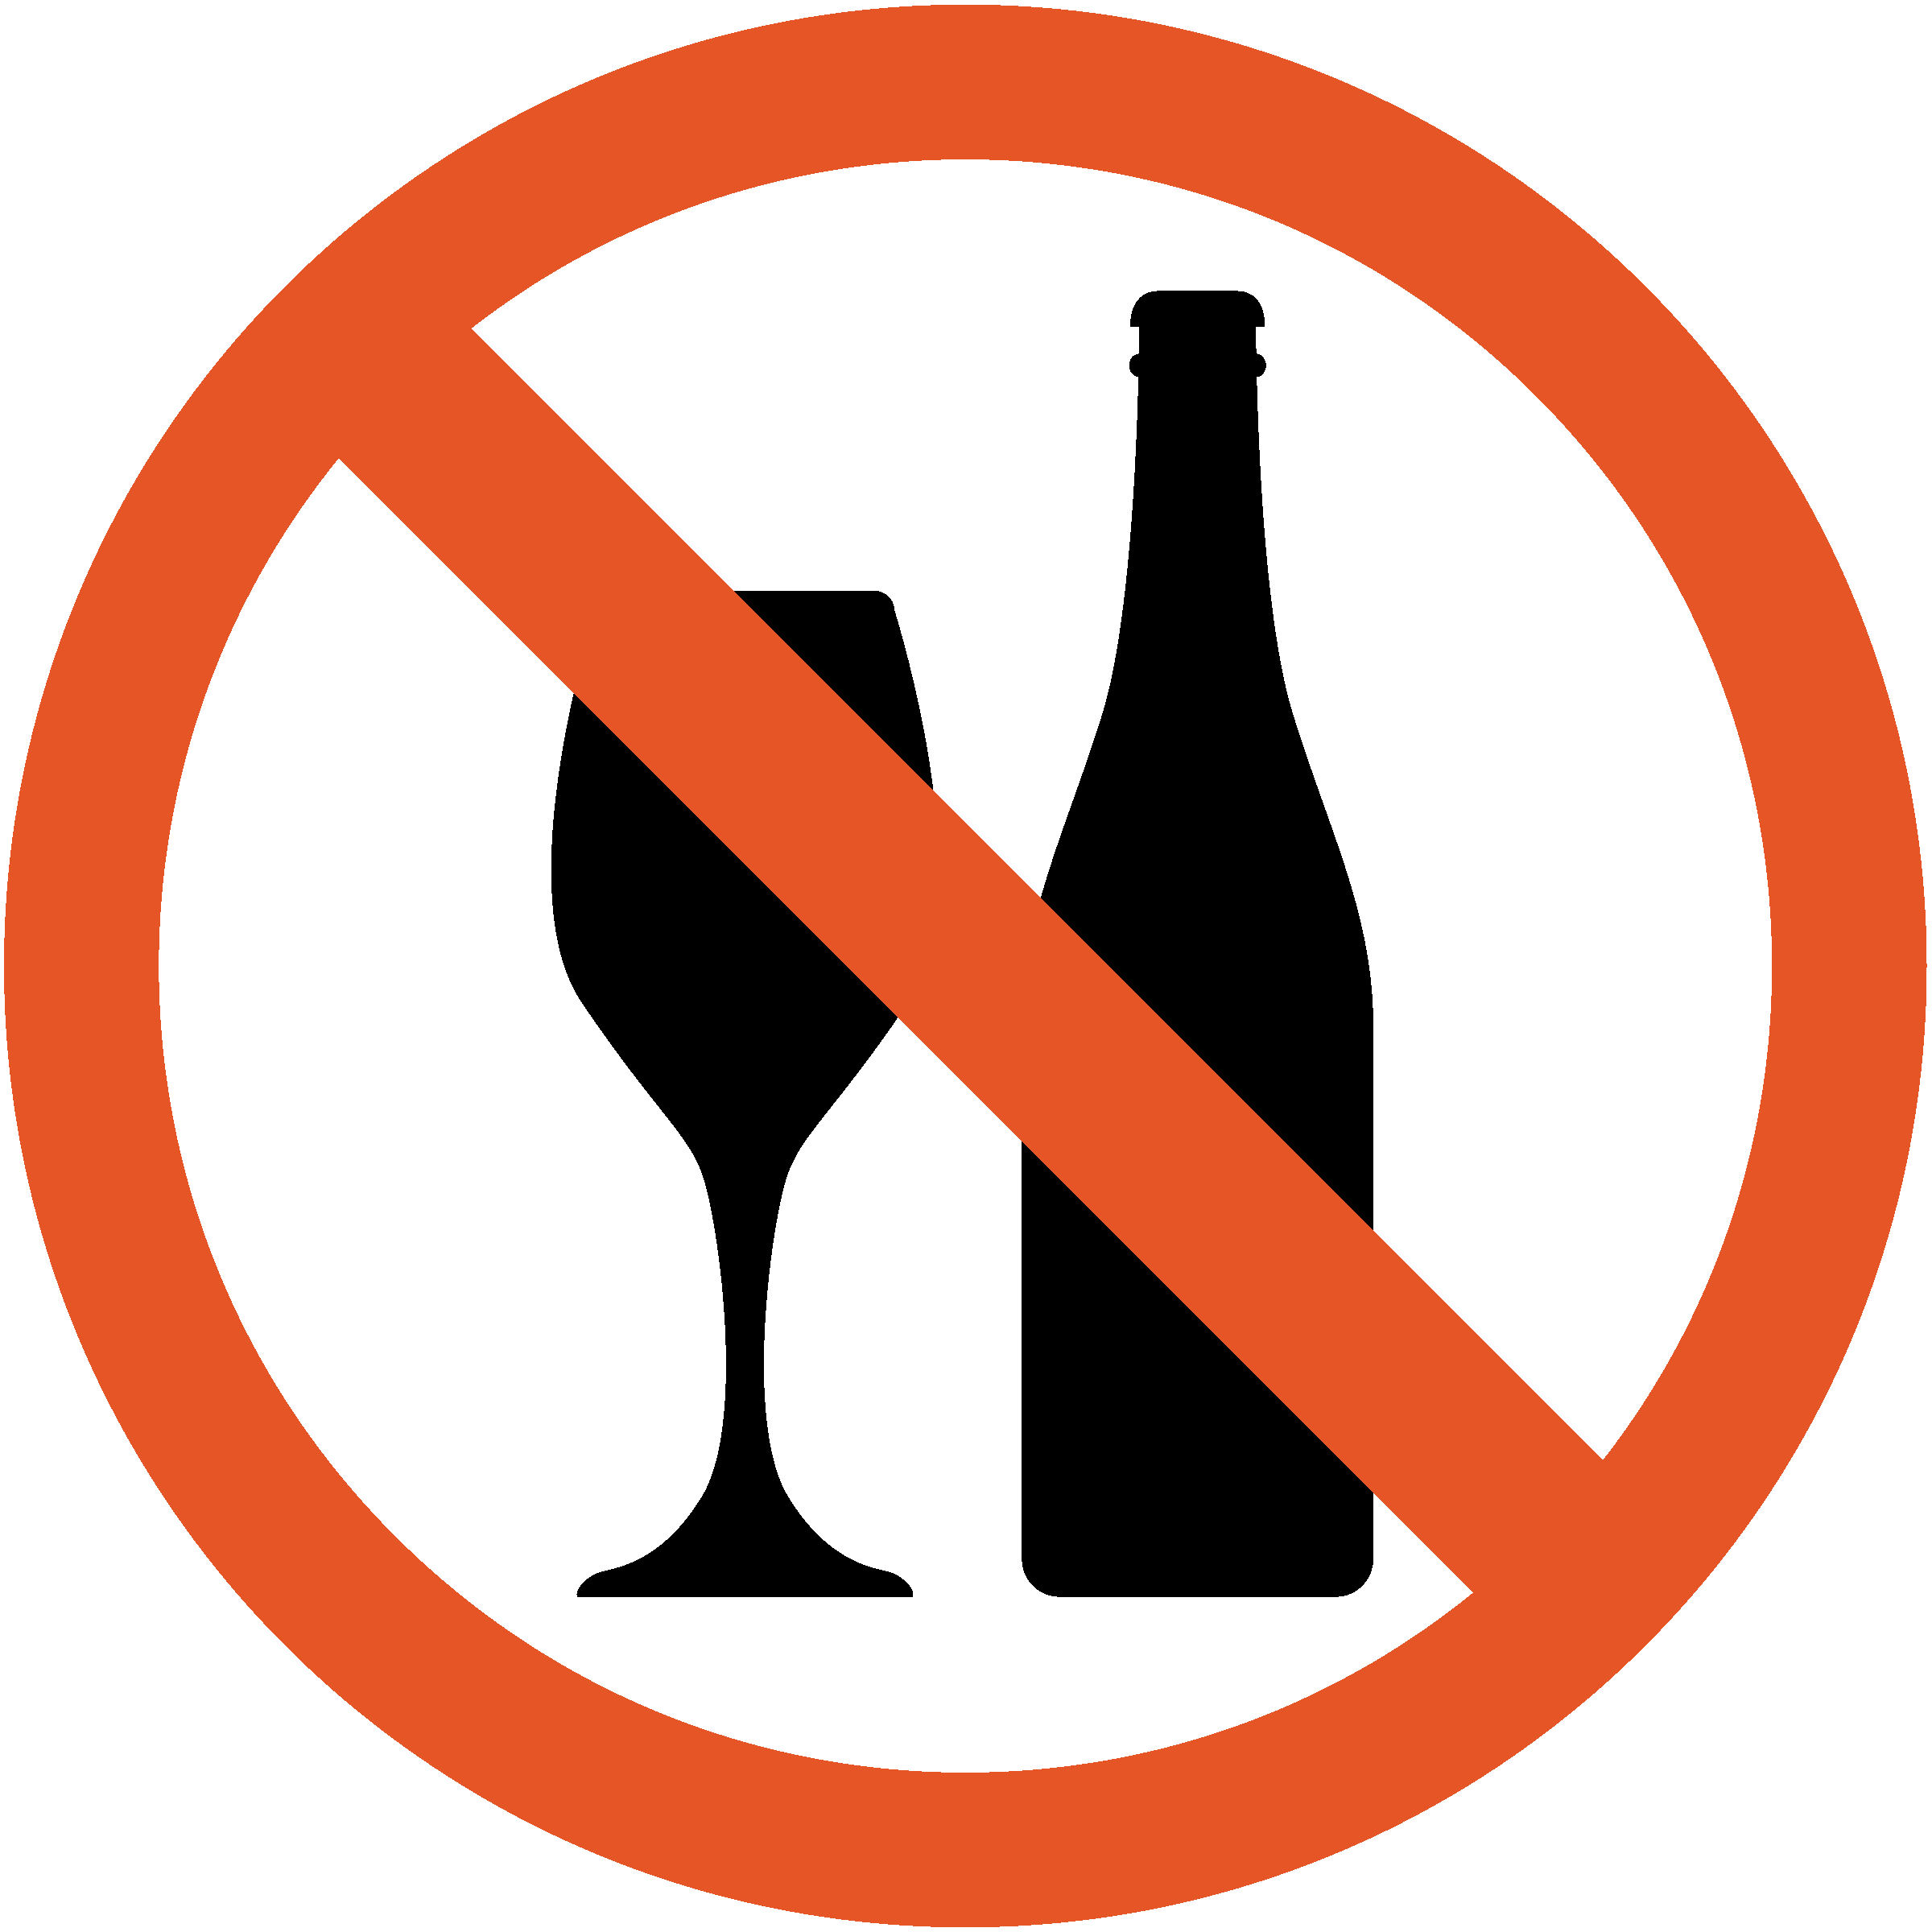 icon of no symbol over wine glass and bottle